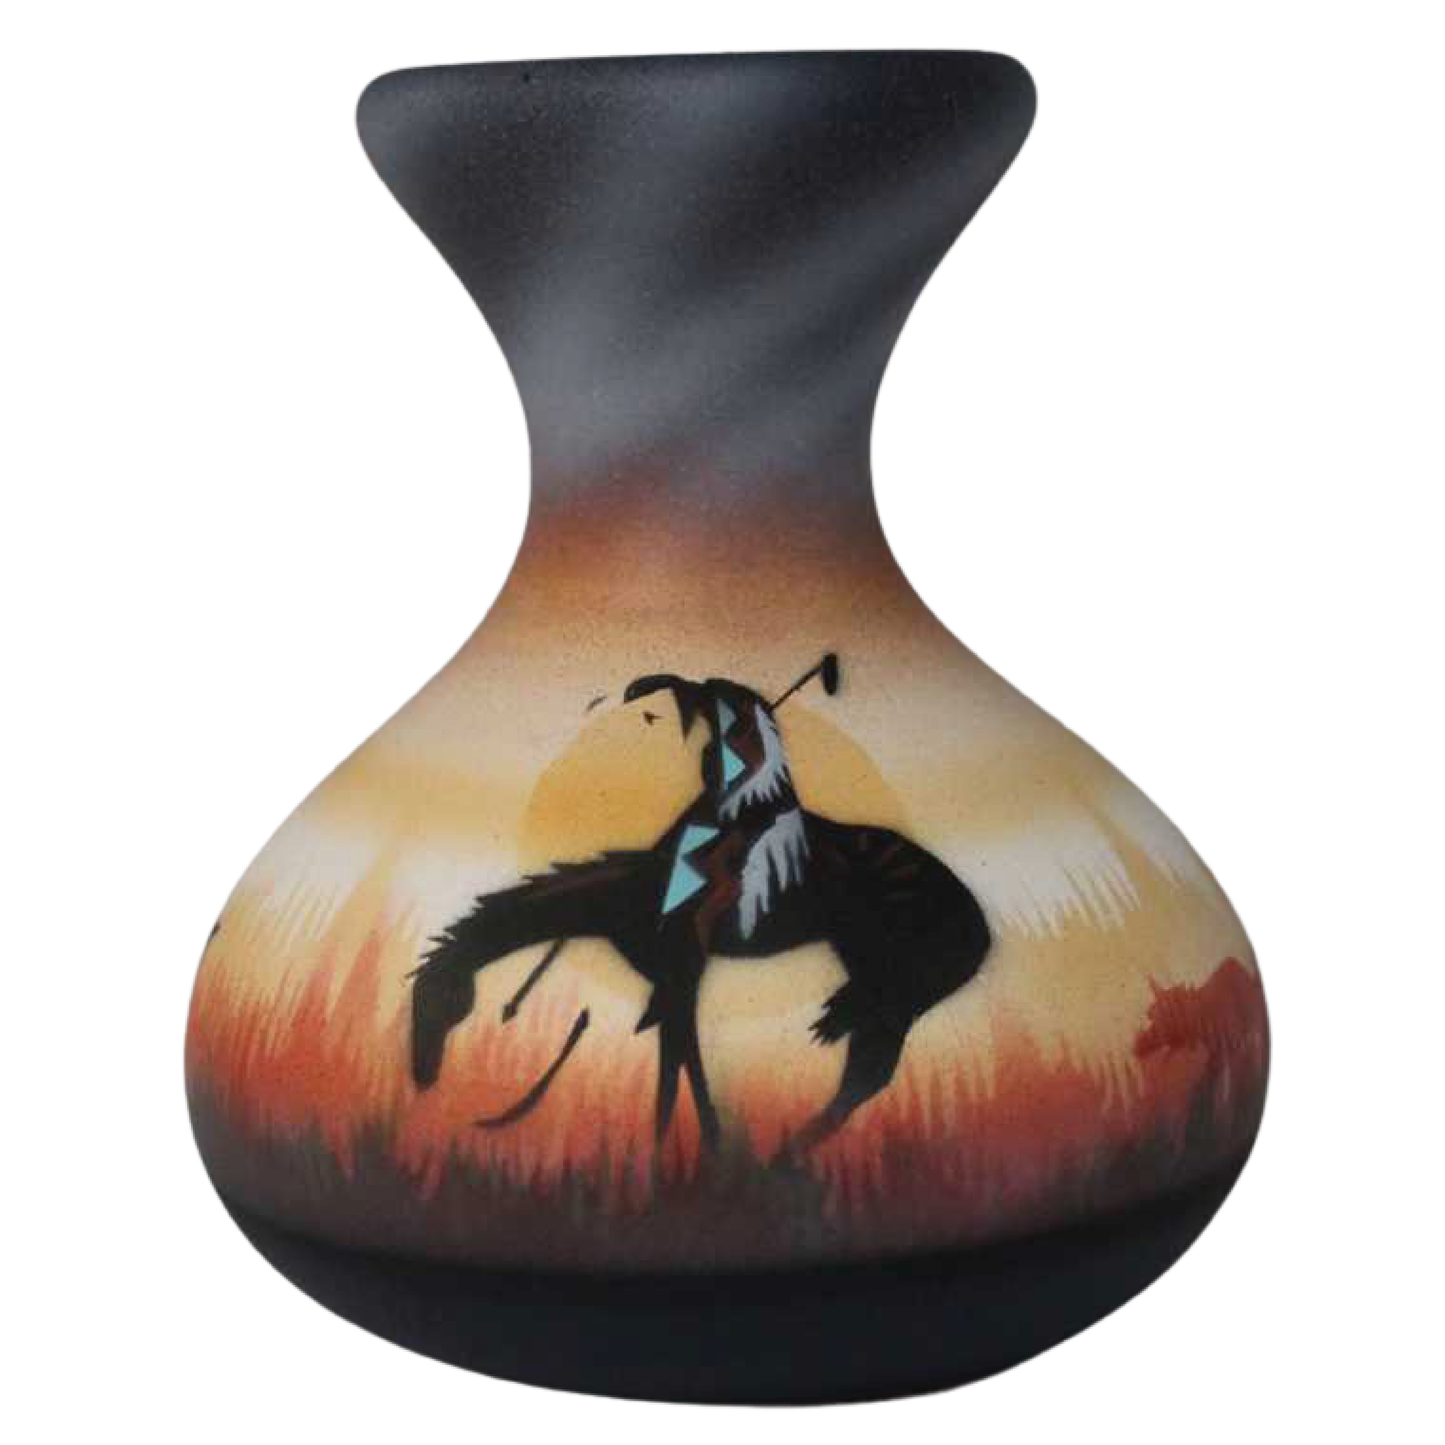 End of the Trail 4 x 5 Bud Vase - (ETS5)